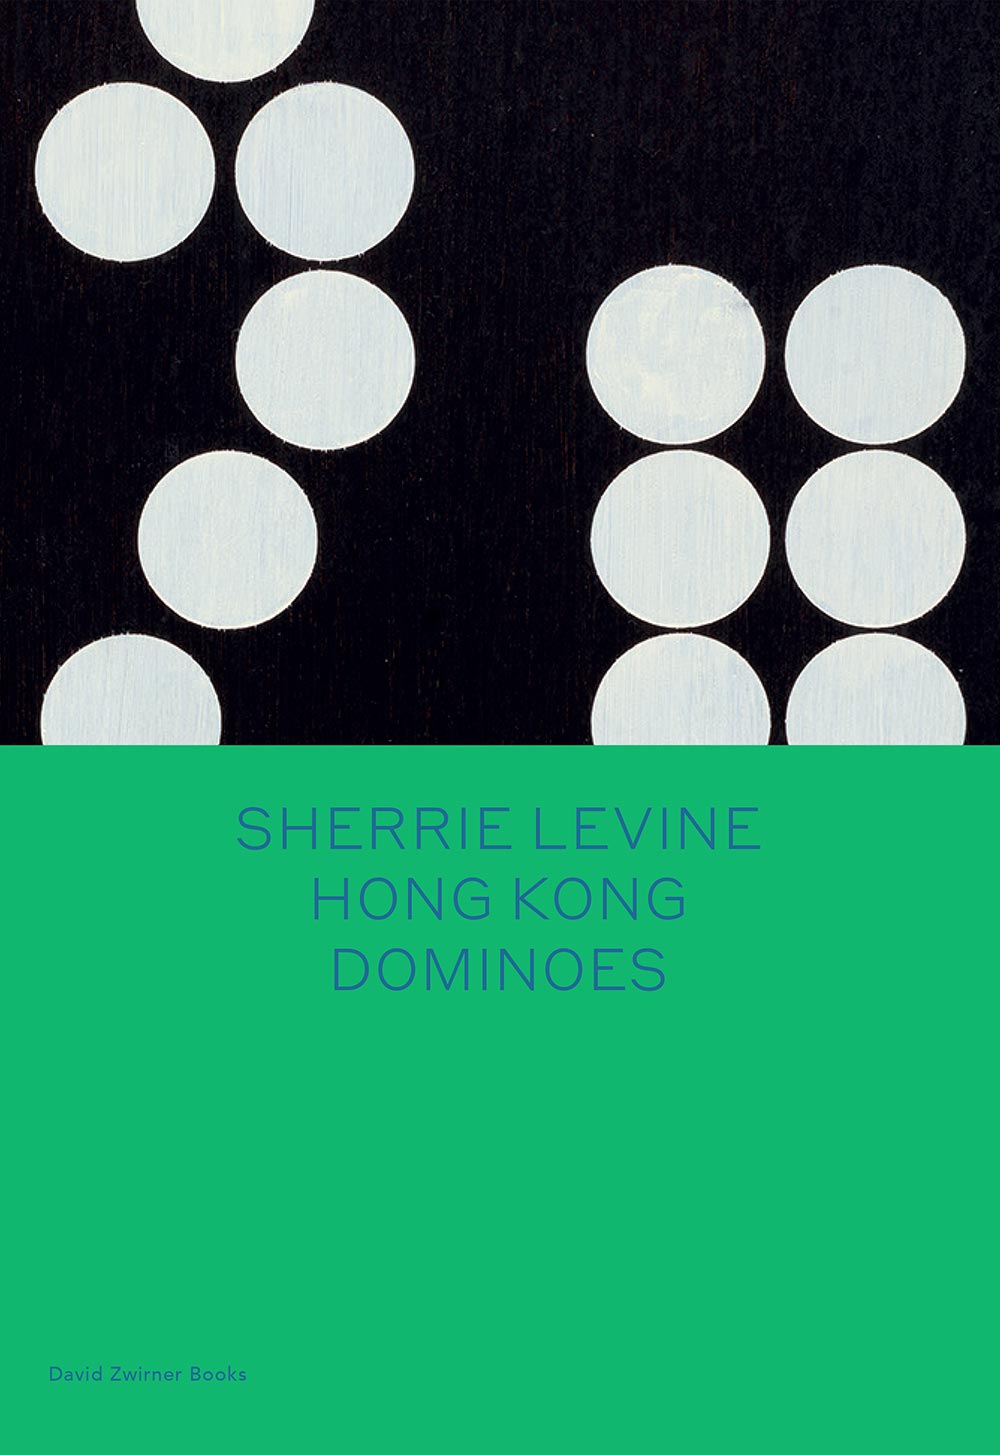 Cover of a book titled Sherrie Levine: Hong Kong Dominoes, published by David Zwirner Books in 2021.